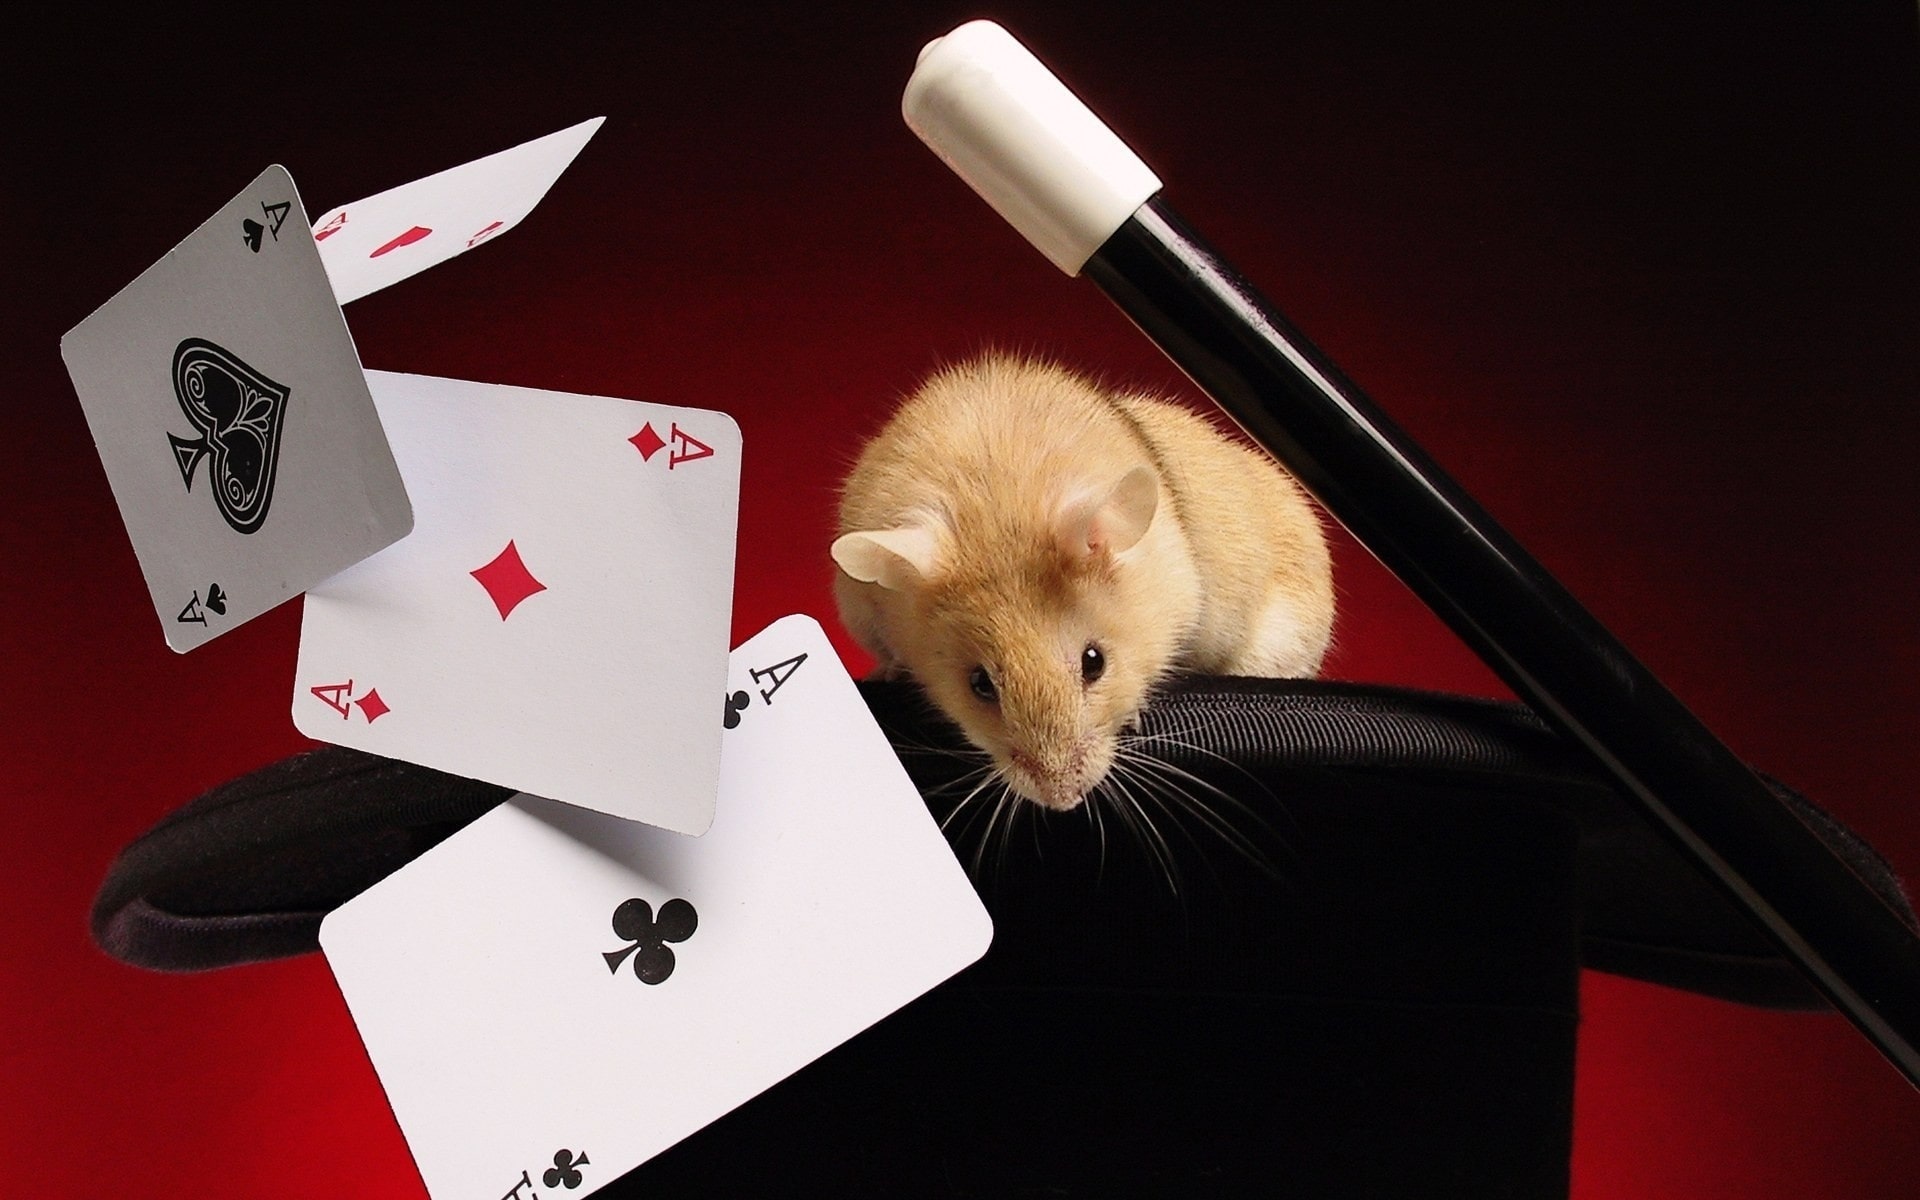 Card tricks and magician wand around a hamster in a magician's hat.